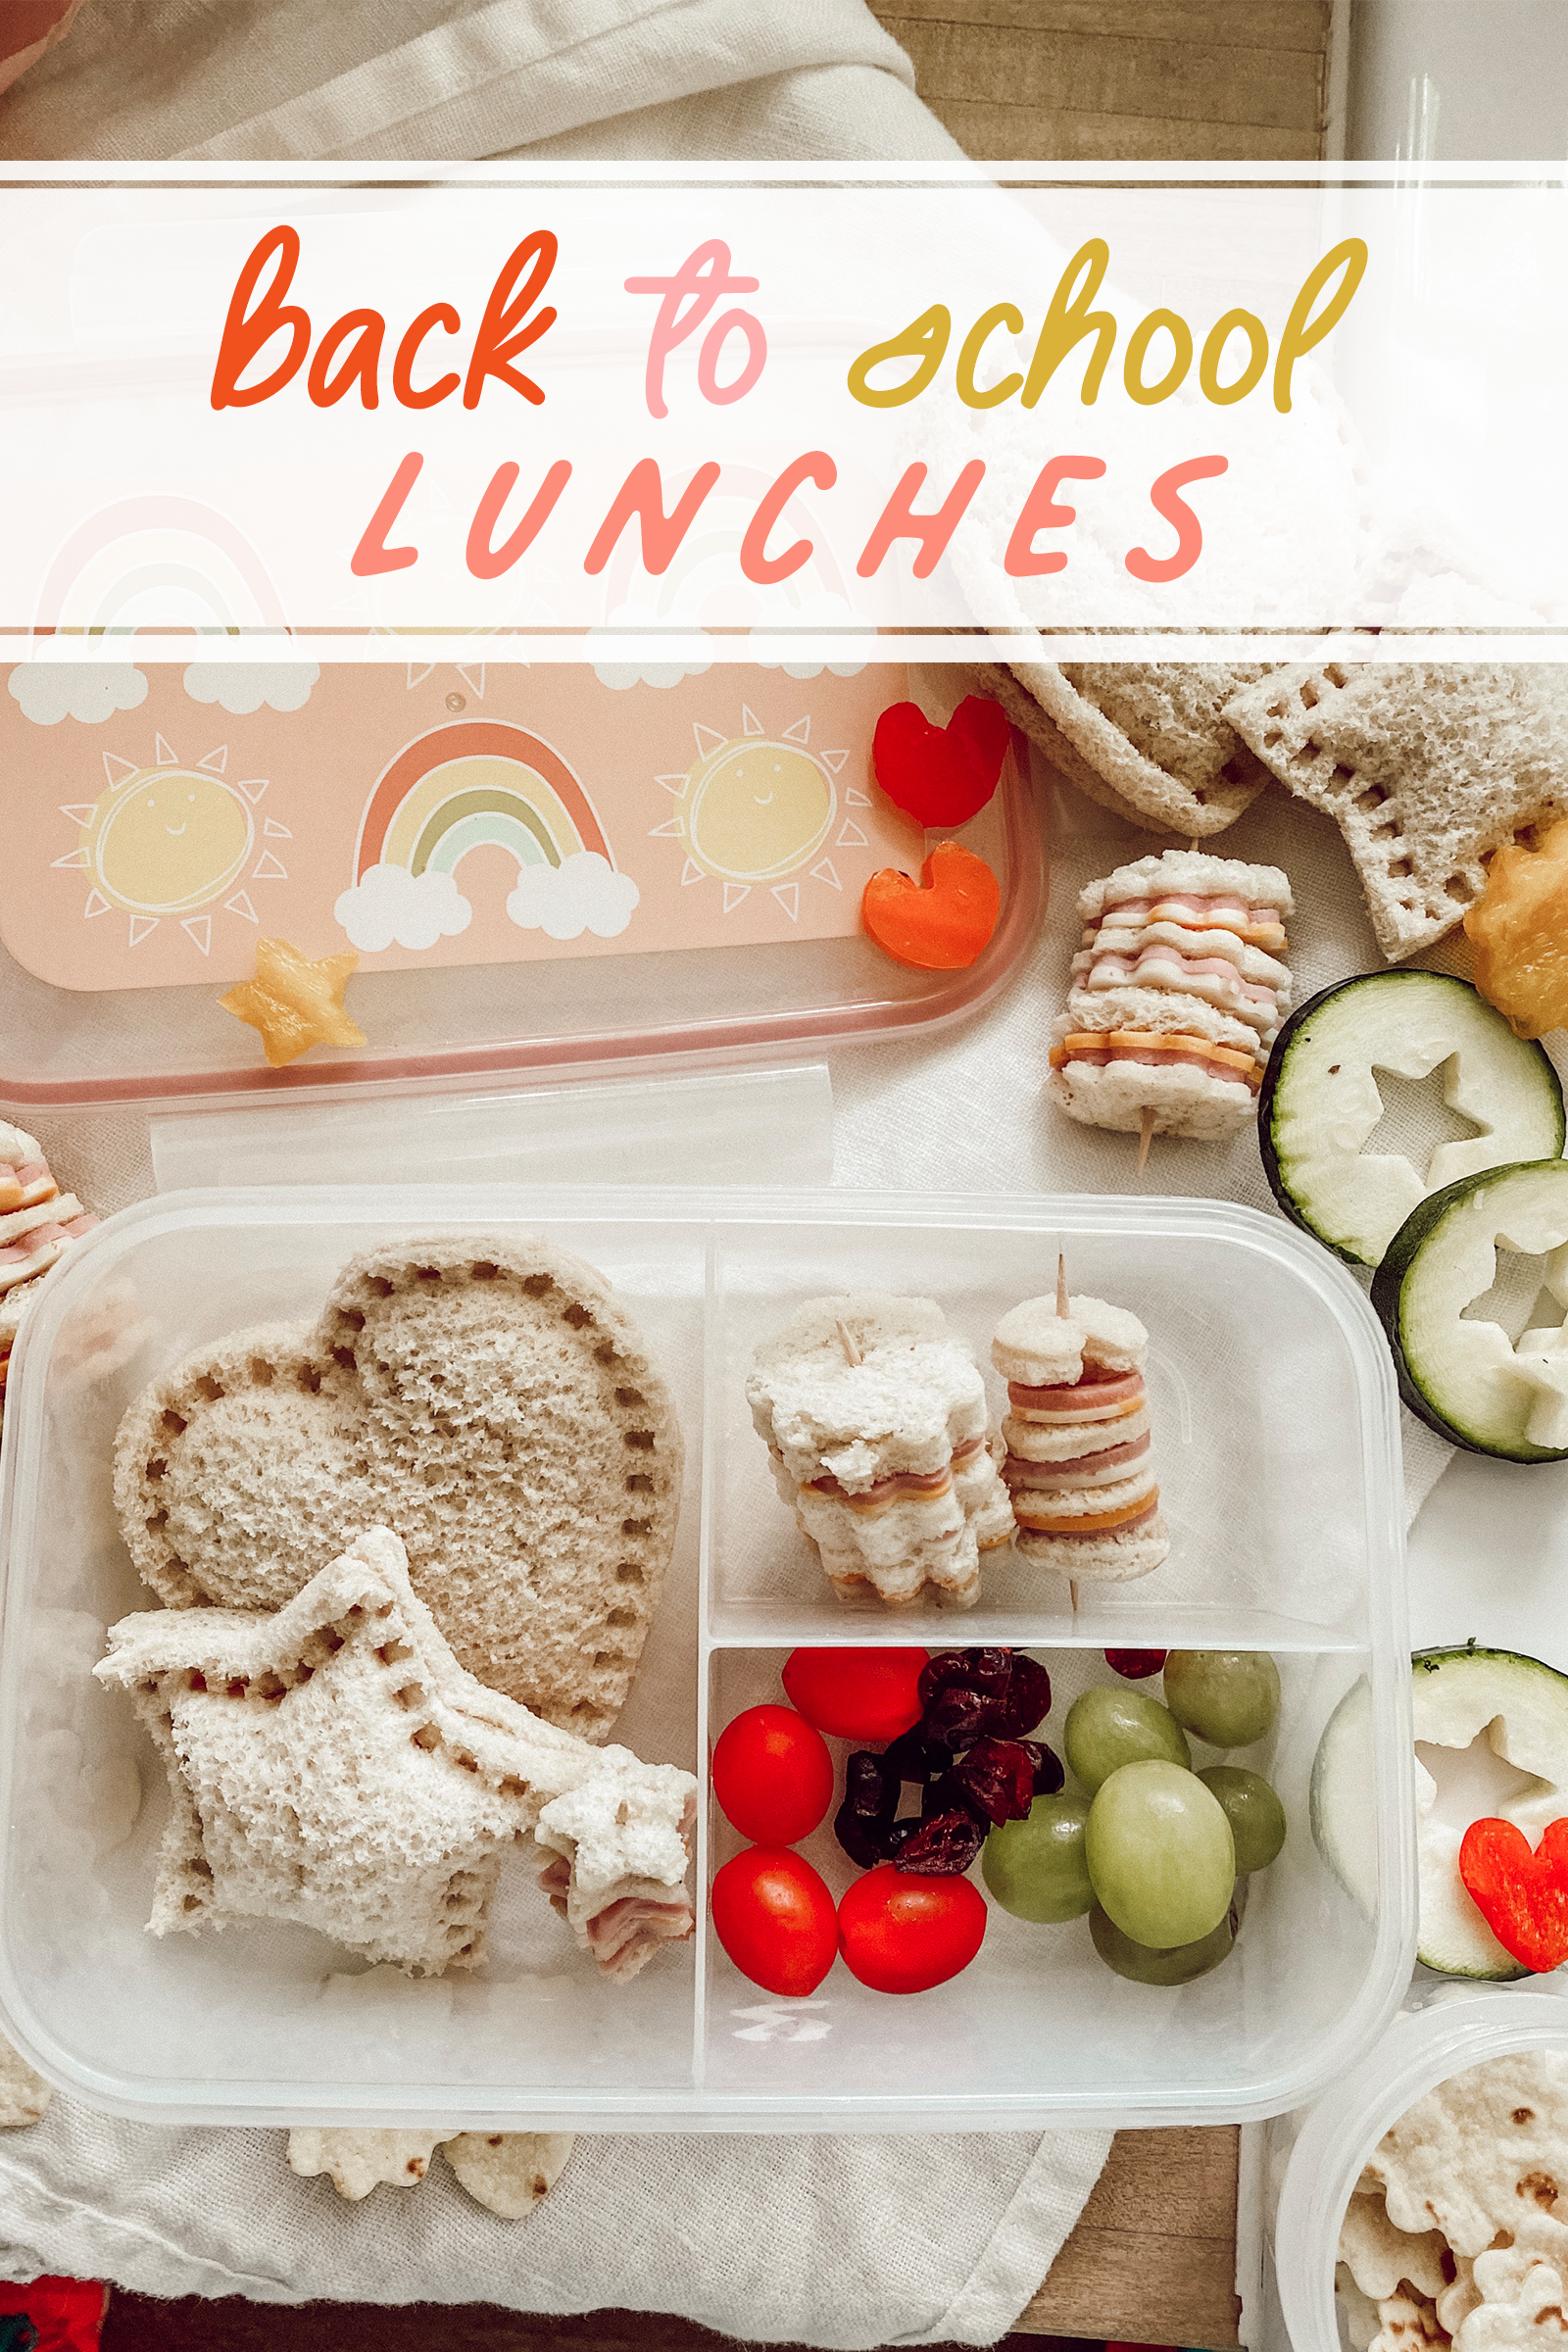 https://thewiegands.com/wp-content/uploads/2020/07/back-to-school-lunches-pin.jpg